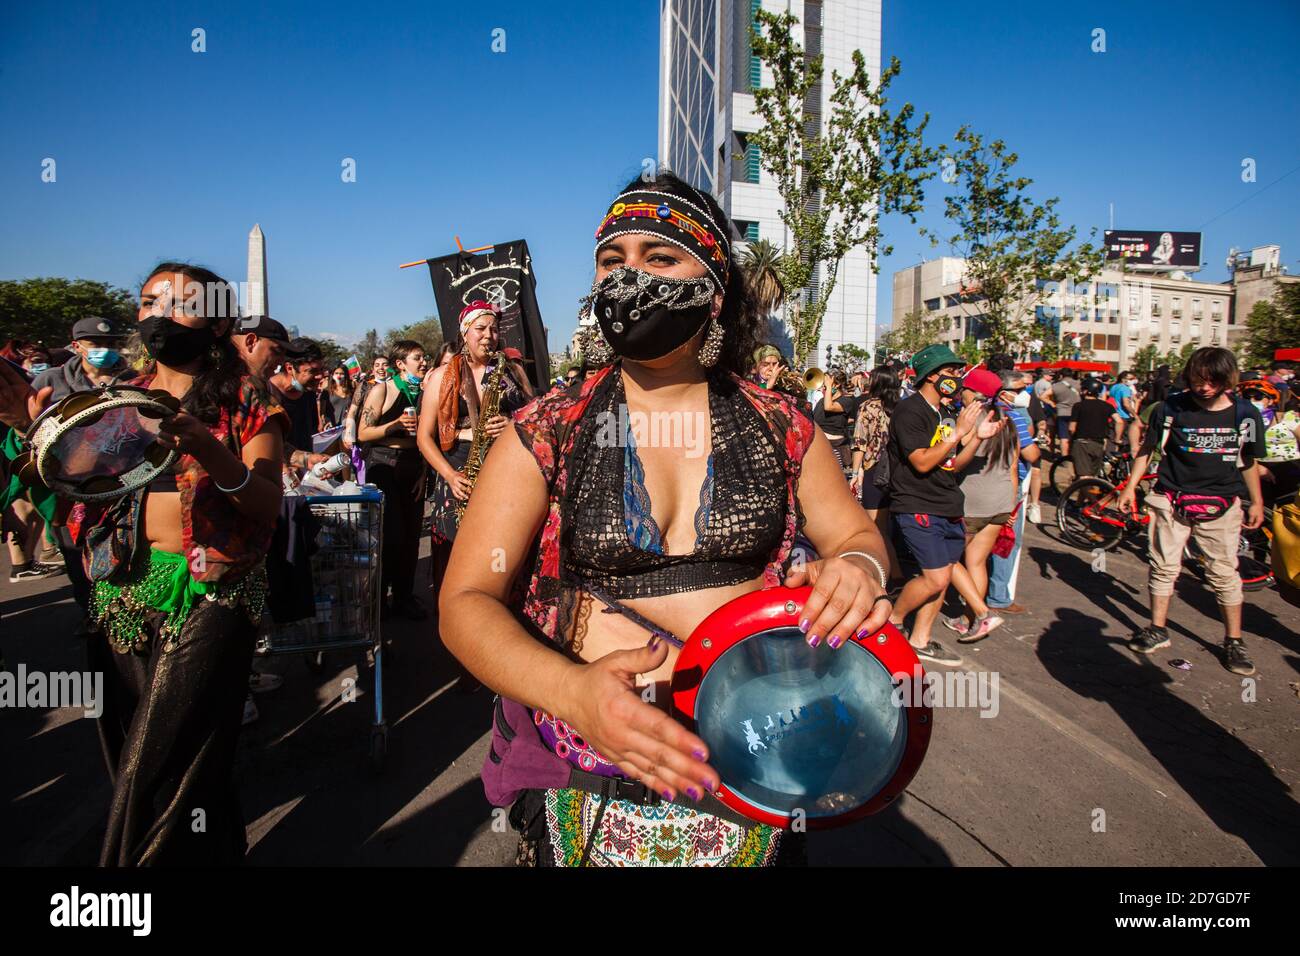 SANTIAGO, CHILE-OCTOBER 18, 2020 - A group of women make a performance during a protest at Plaza Italia in Santiago, Chile Stock Photo